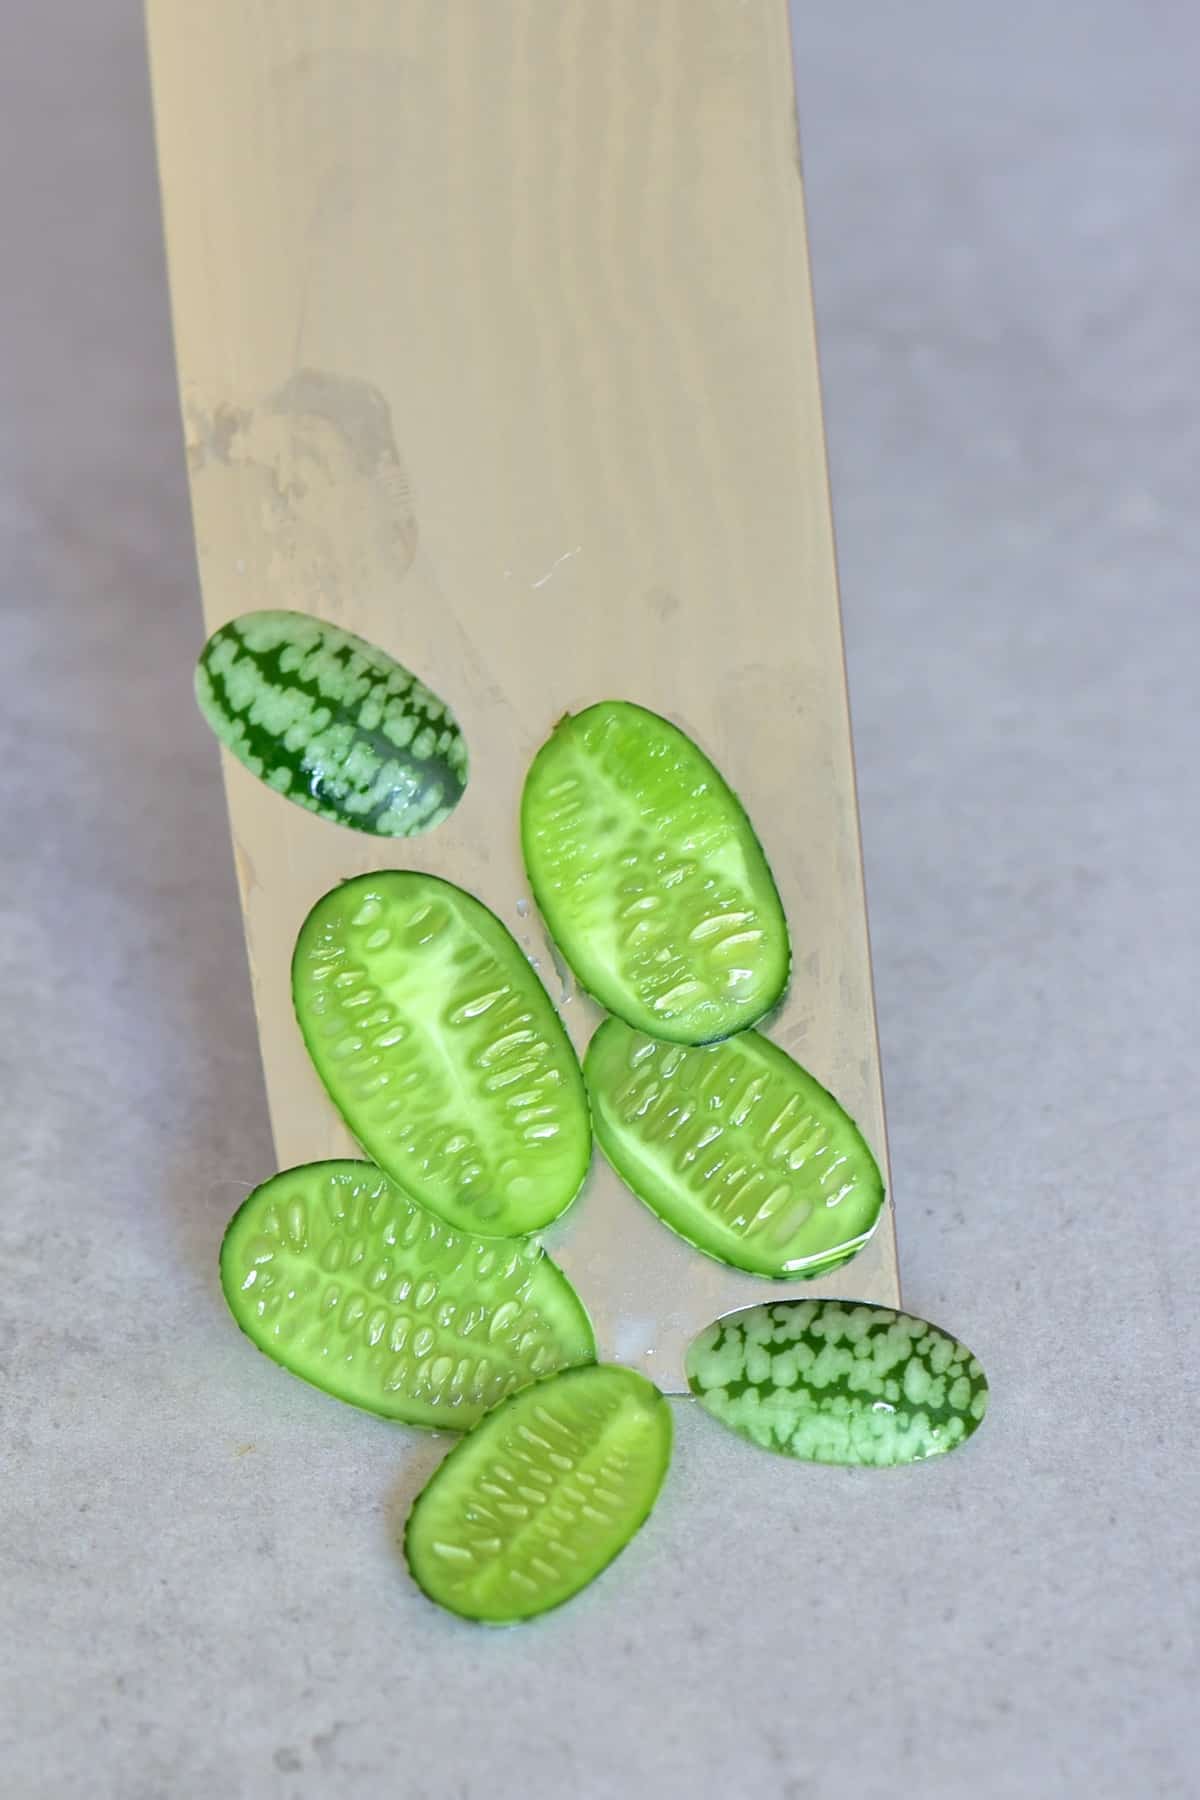 Sliced cucamelon berries placed on a knife